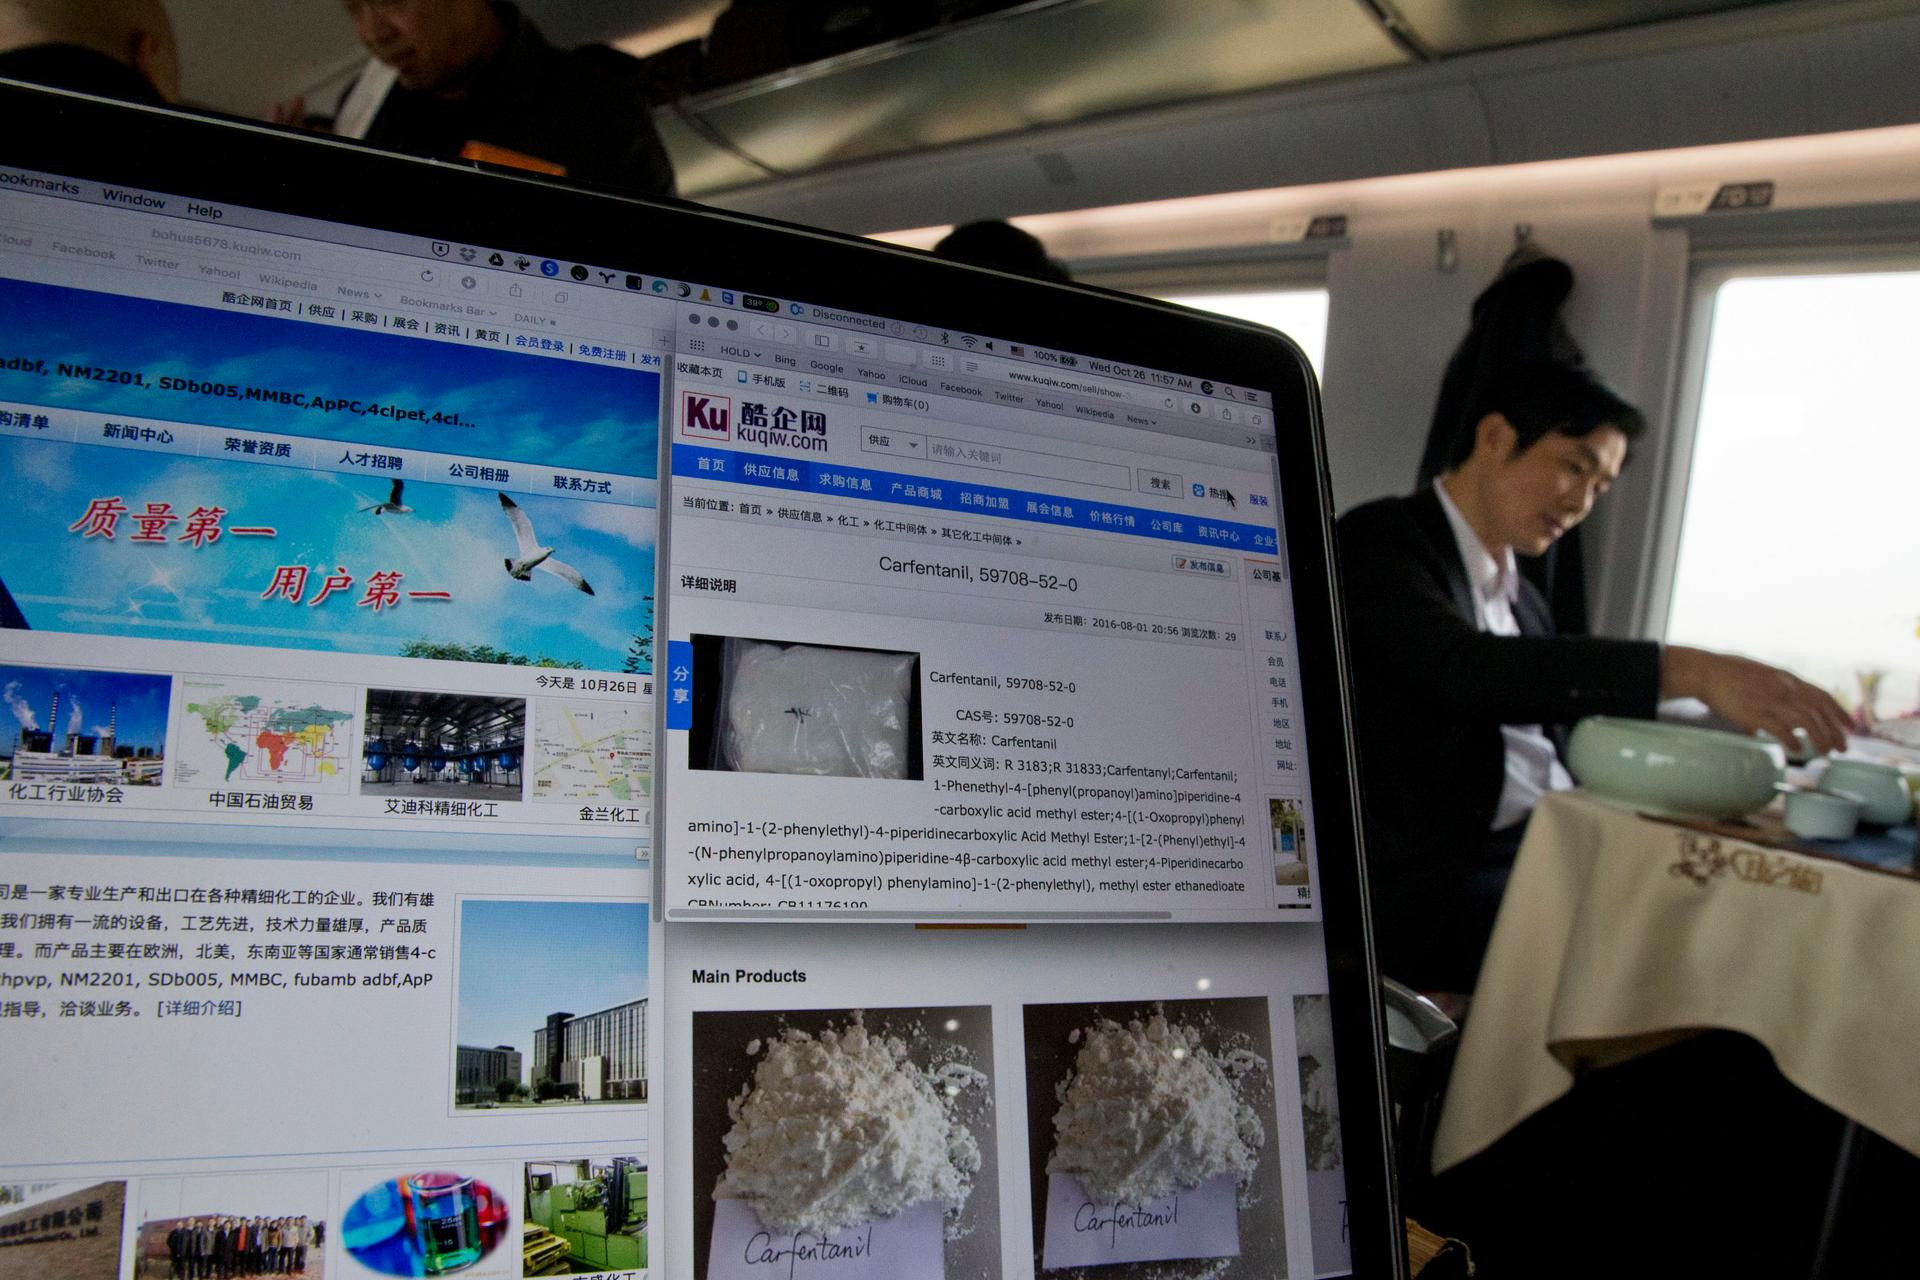 A man drinks tea near a computer screen displaying websites of companies selling the lethal synthetic opioid carfentanil online on a train leaving Beijing on Wednesday, Oct. 26, 2016. Use of the deadly chemical carfentanil by drug dealers has exploded acr